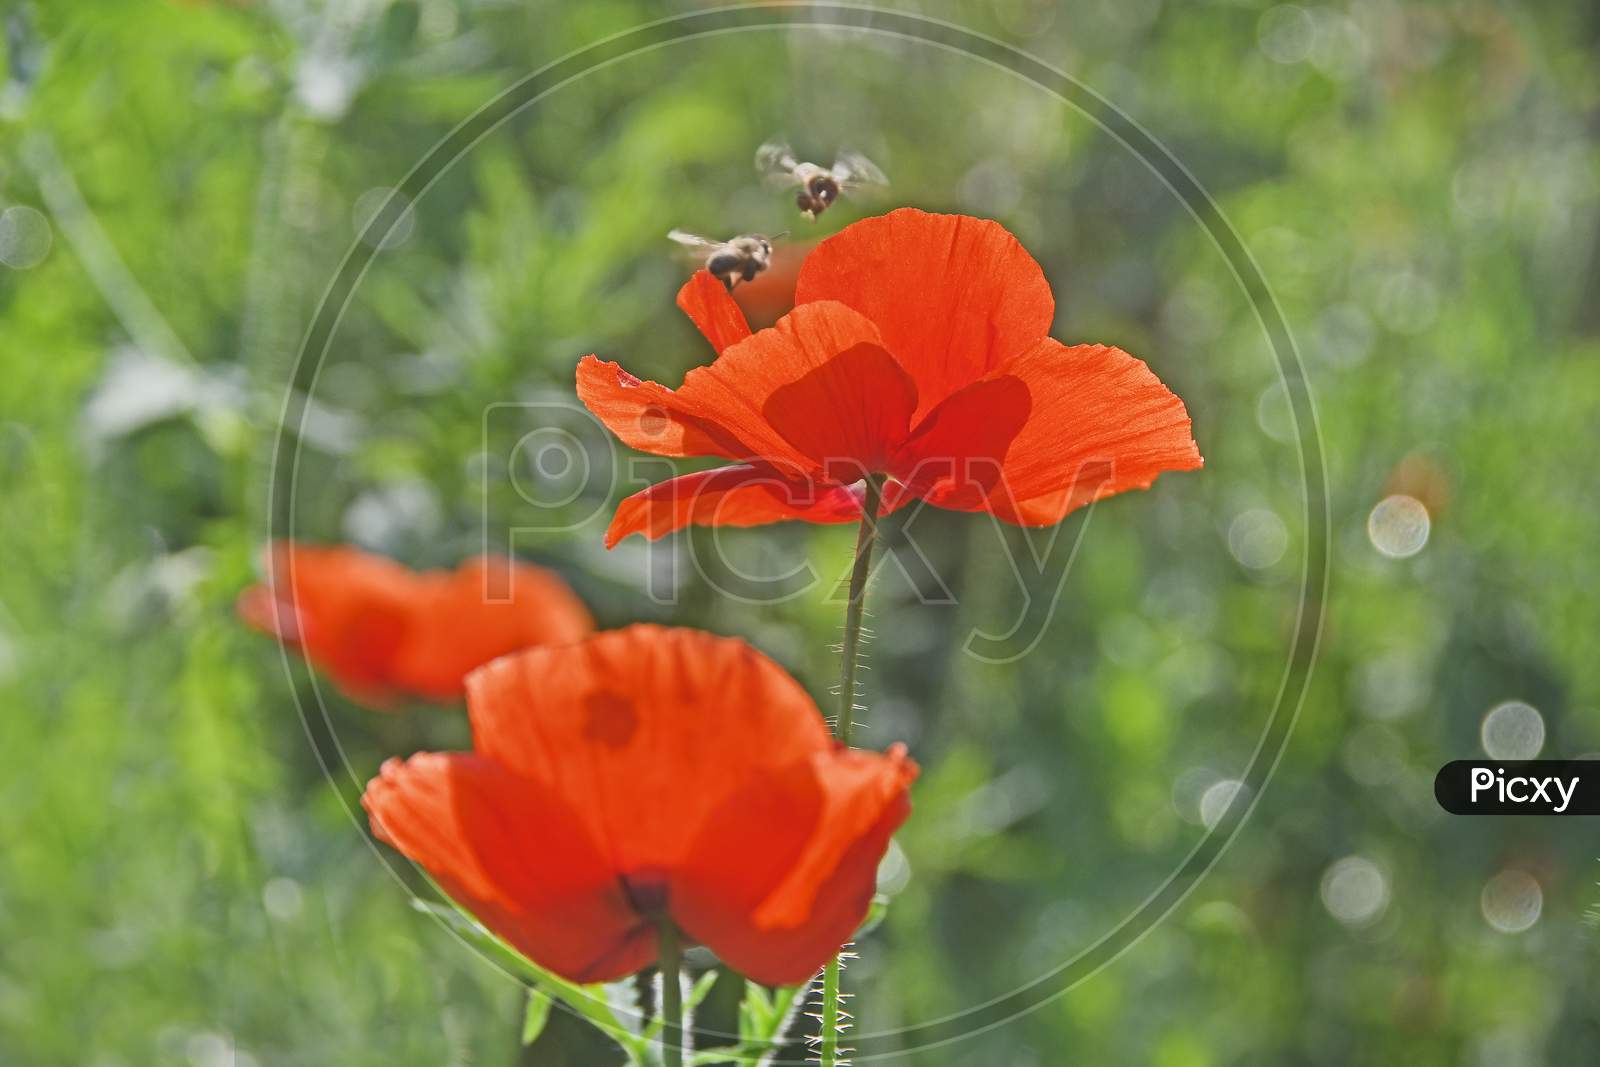 Bees Flying On Red Corn Poppy In The Spring Season.